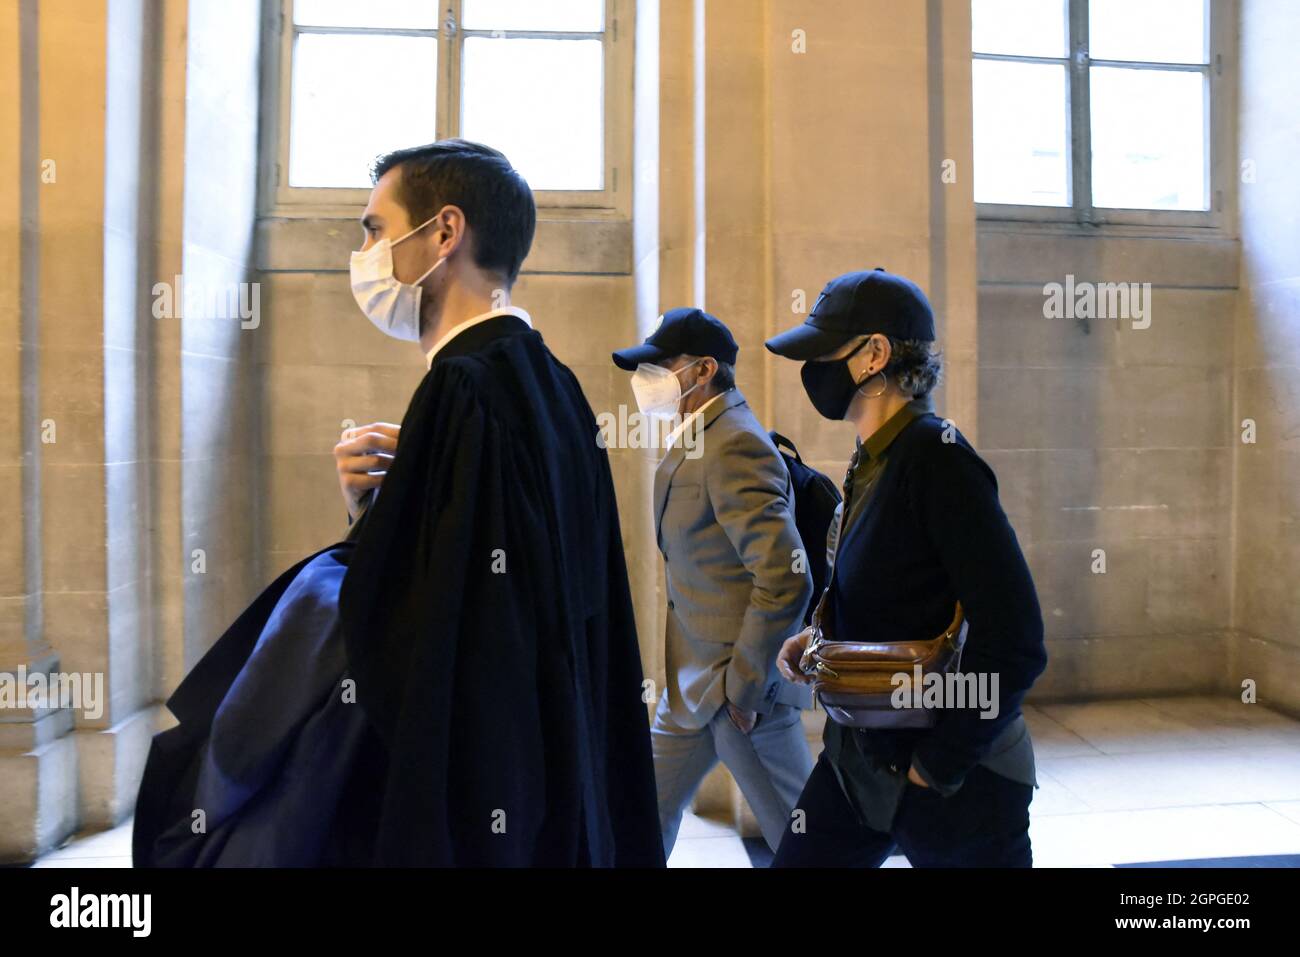 Ex member of the Red Brigates Raffaele Ventura - Trial of 7 Ex Italian Red Brigades for their extradition to Italy, at the courthouse in Paris, France, on September 29, 2021. The trial postponed to January 12, 2022. Photo by Patrice Pierrot/Avenir Pictures/ABACAPRESS.COM Stock Photo